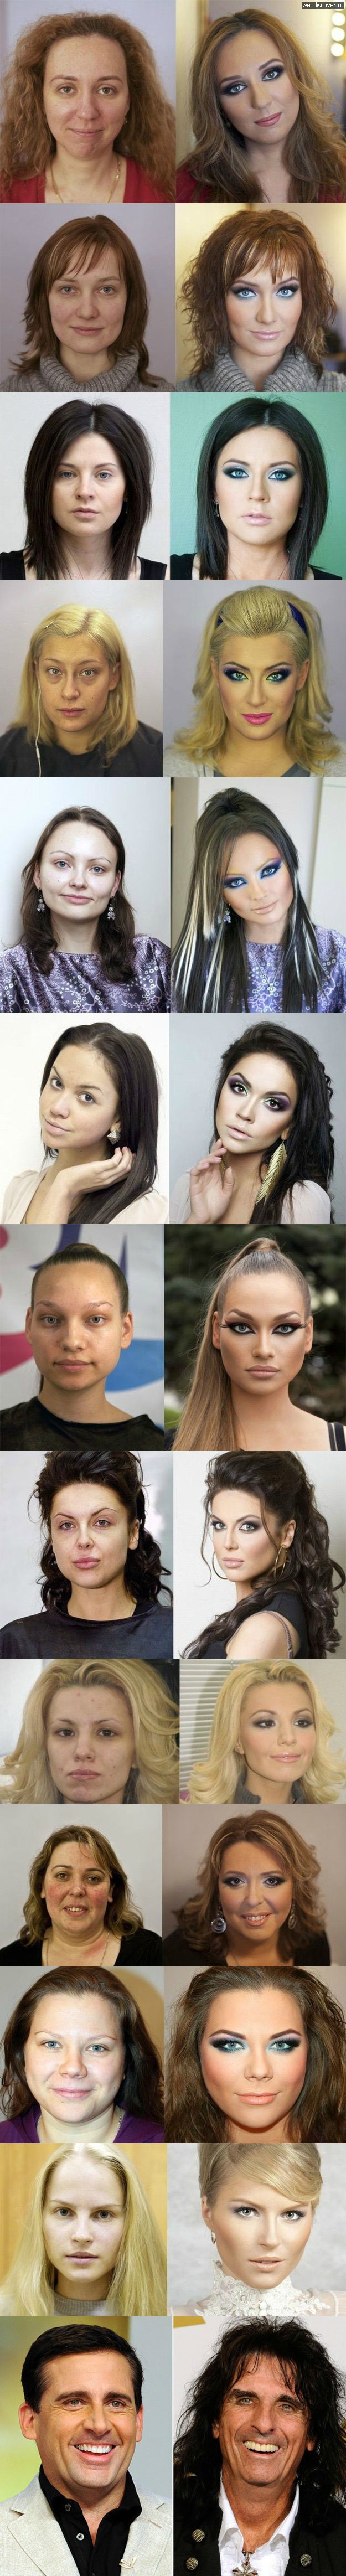 The power of makeup.